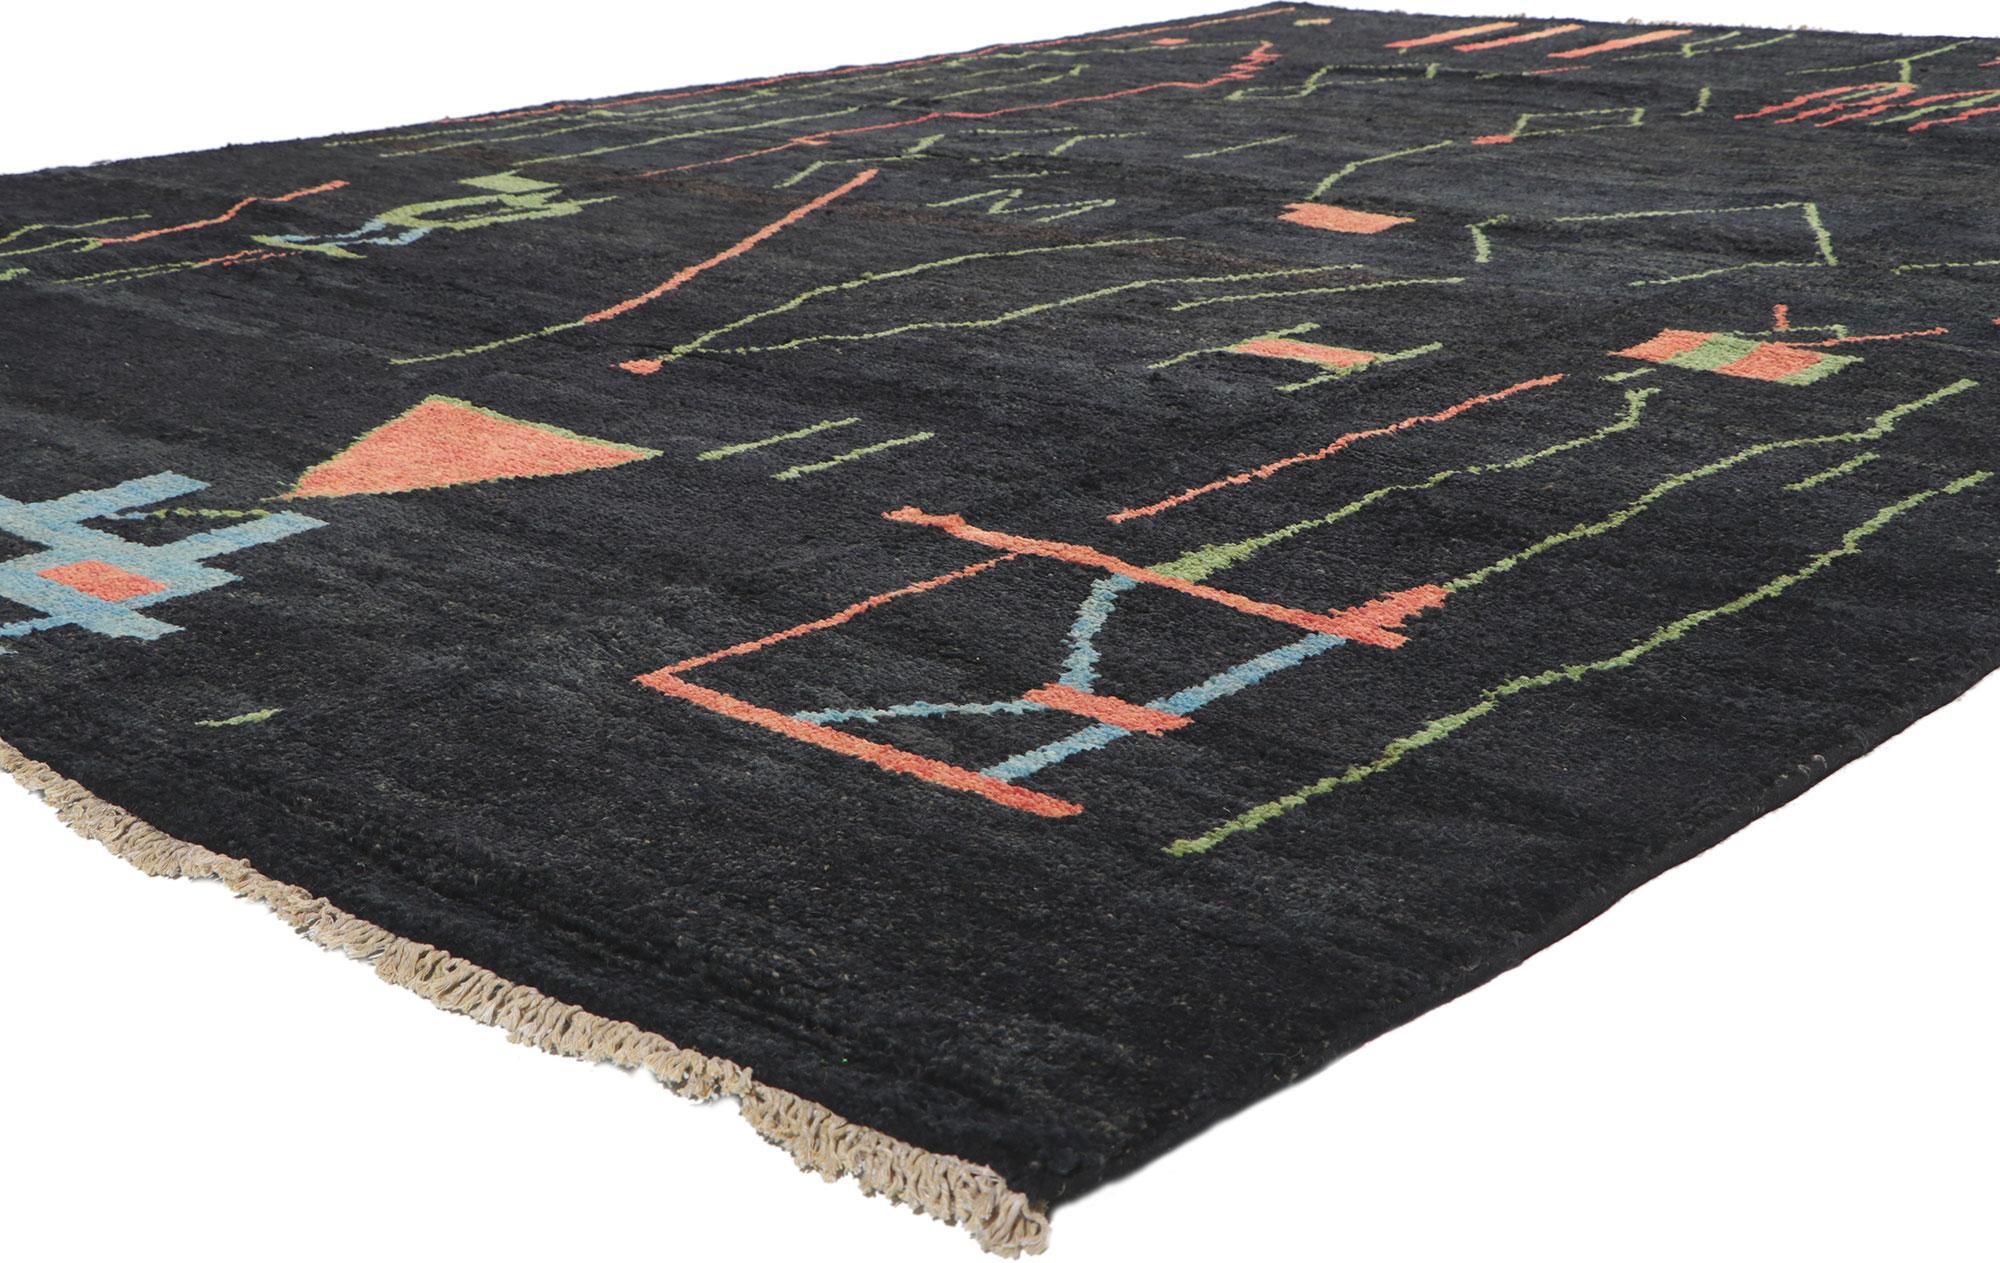 80706 New Contemporary Moroccan Rug with Tribal Style 09'06 x 12'11. Showcasing an expressive tribal design, incredible detail and texture, this hand knotted wool contemporary Moroccan area rug is a captivating vision of woven beauty. The bold